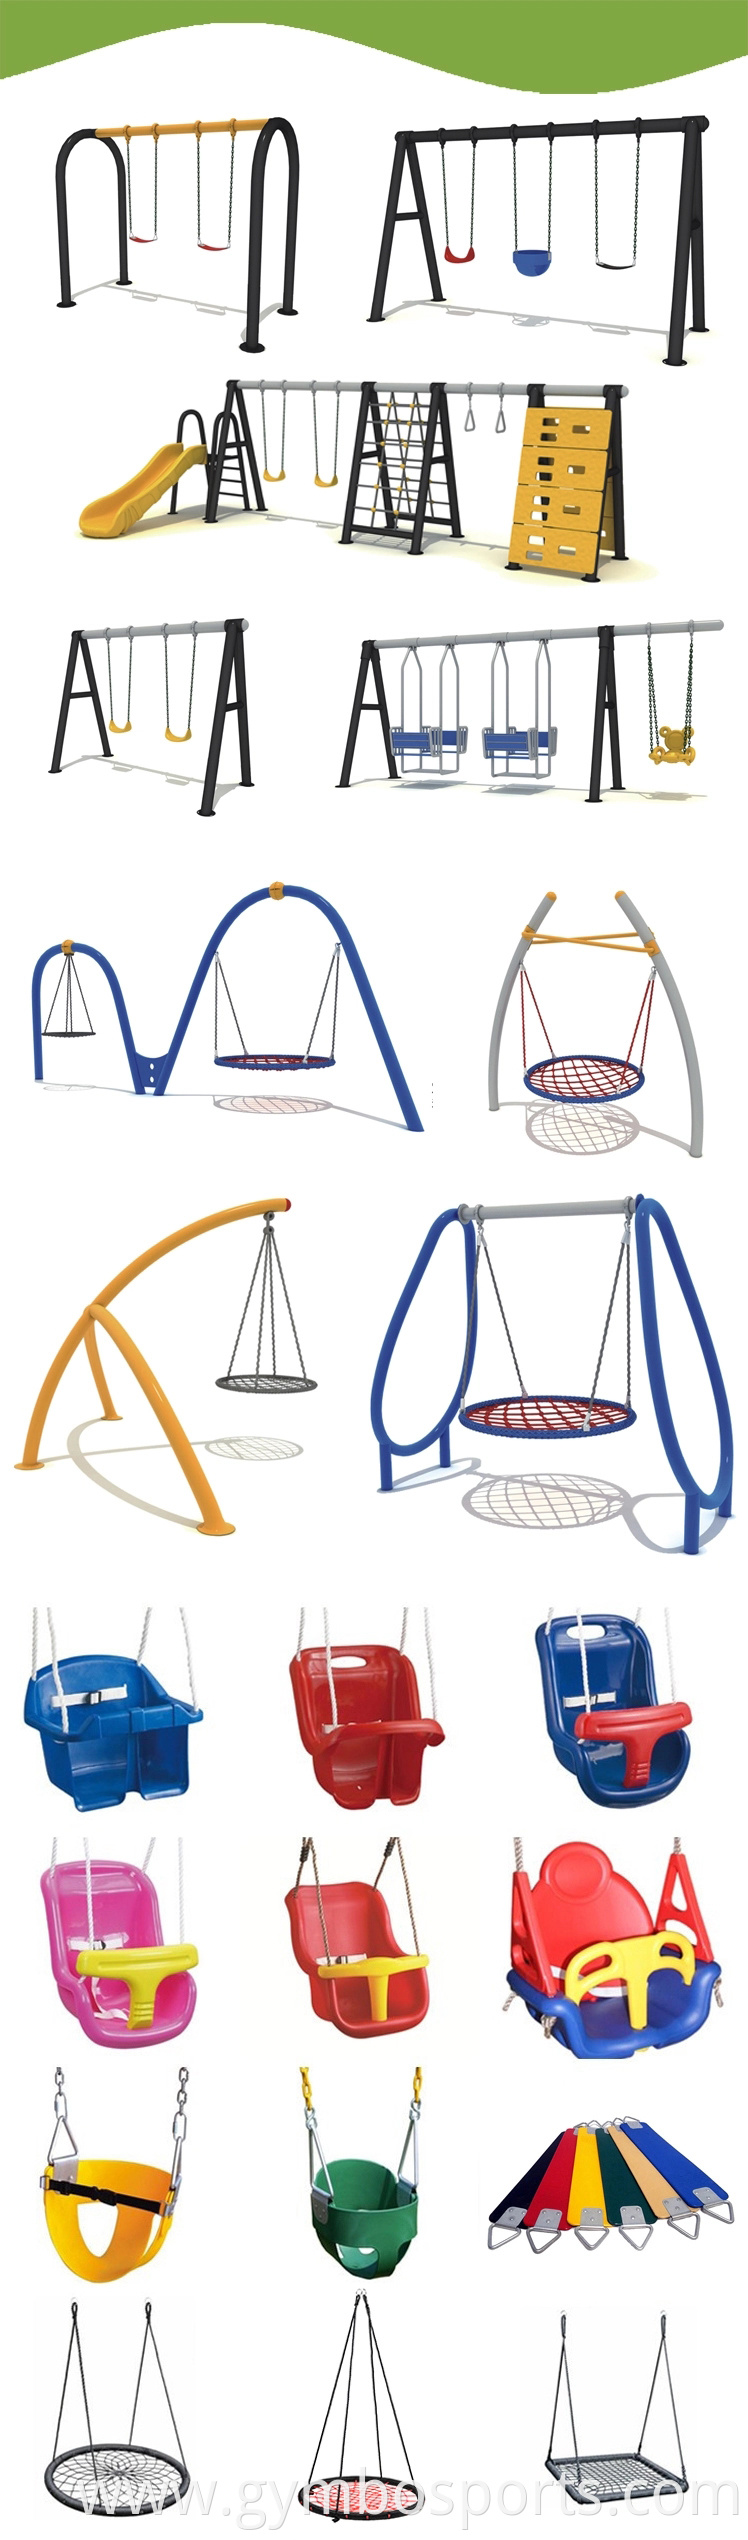 Wholesale Factory Price Good Quality Outdoor Kids Plastic Footrest Swing